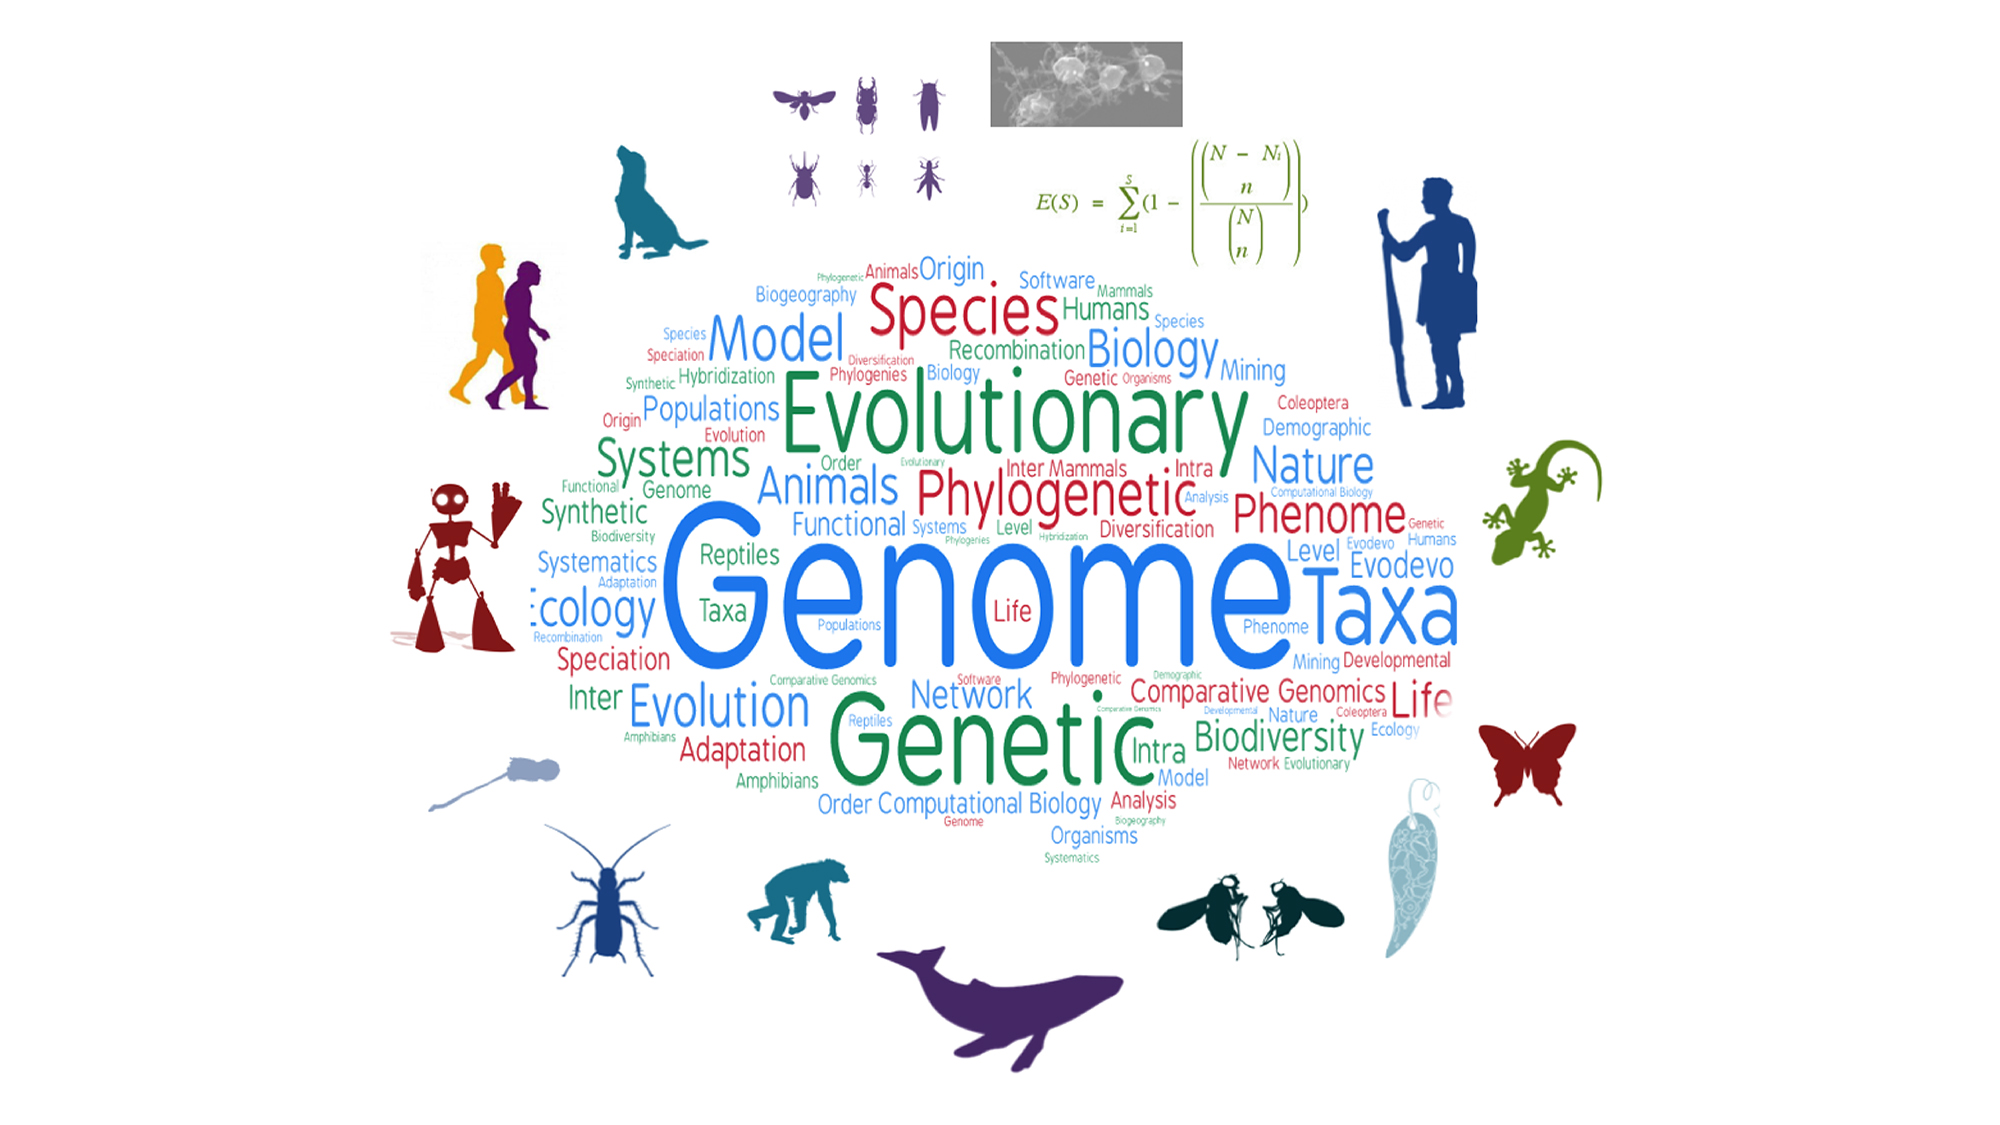 The Institute of Evolutionary Biology covers a wide range of topics. Credit: Tomàs Marquès-Bonet.